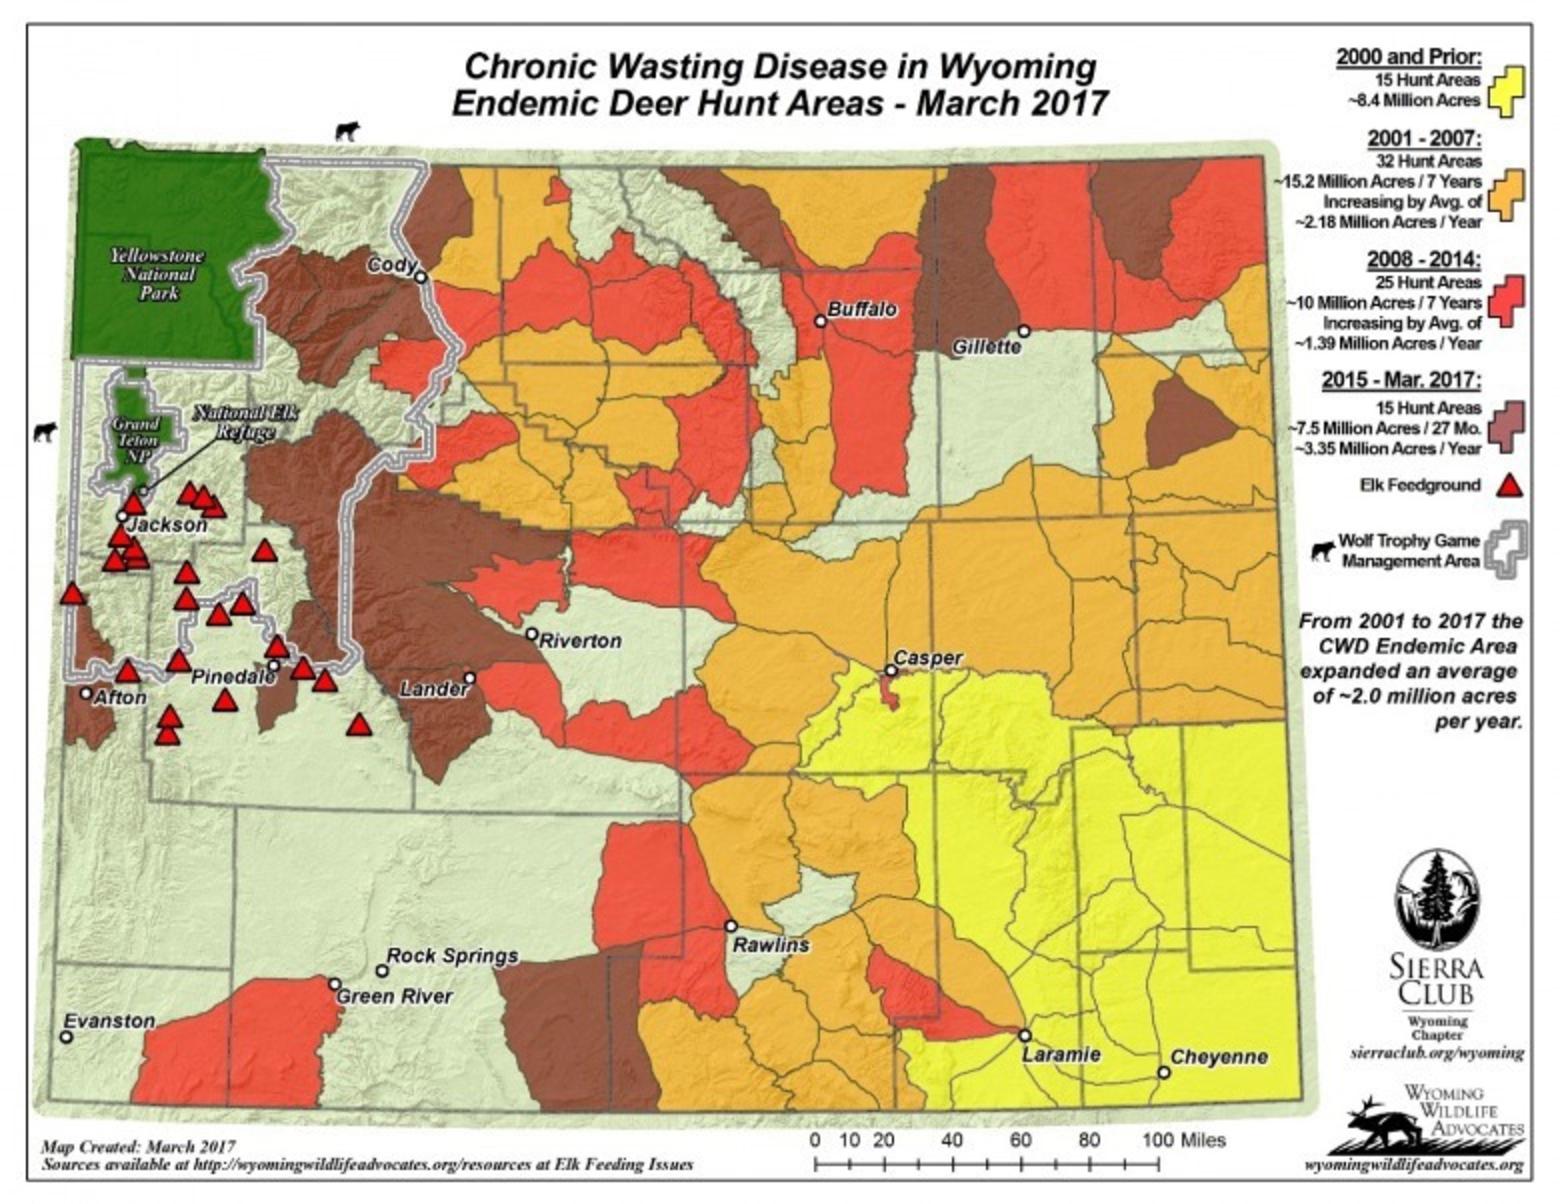 Foreshadowing the spread across Montana? CWD was first diagnosed in southeastern Wyoming (marked in yellow) and over the last three decades has expanded in deer herds. The disease, in November 2017, was diagnosed for the first time ever in Montana wildlife just north of the state border with Wyoming and is now racing toward the heart of the Greater Yellowstone Ecosystem. Imagine this map flipped sideways to indicate a possible progression northward into Montana. “I see no reason not to believe that CWD will not advance through Montana as quickly it has through Wyoming,” says Lloyd Dorsey, hunter and conservation director for the Wyoming state chapter of the Sierra Club.